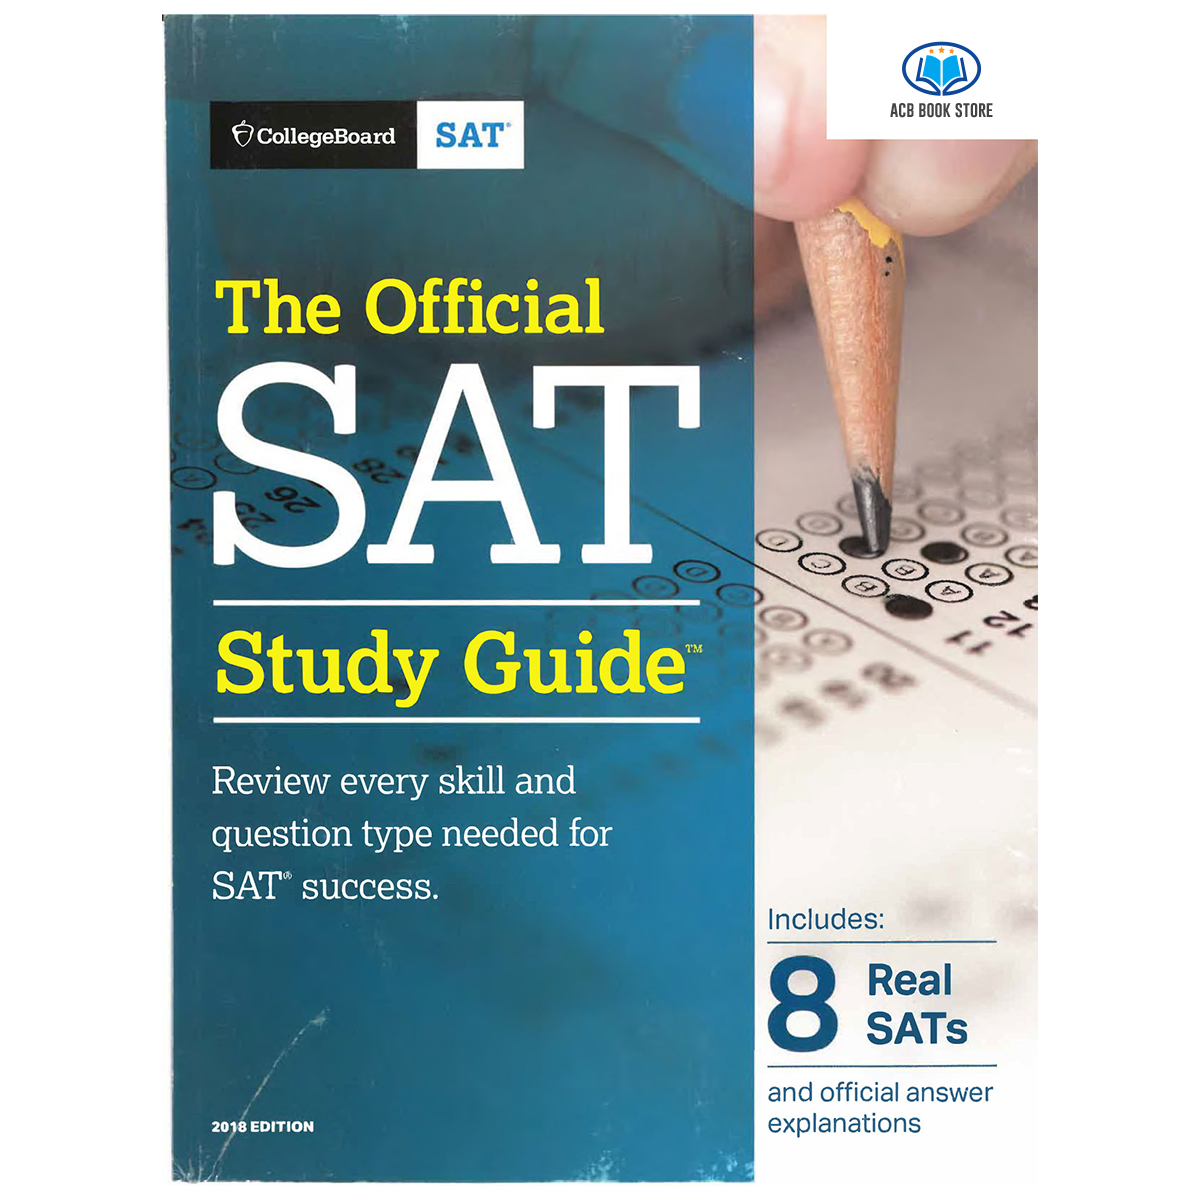 Sách The Official SAT Study Guide, 2018 Edition Sách đen trắng - ACB